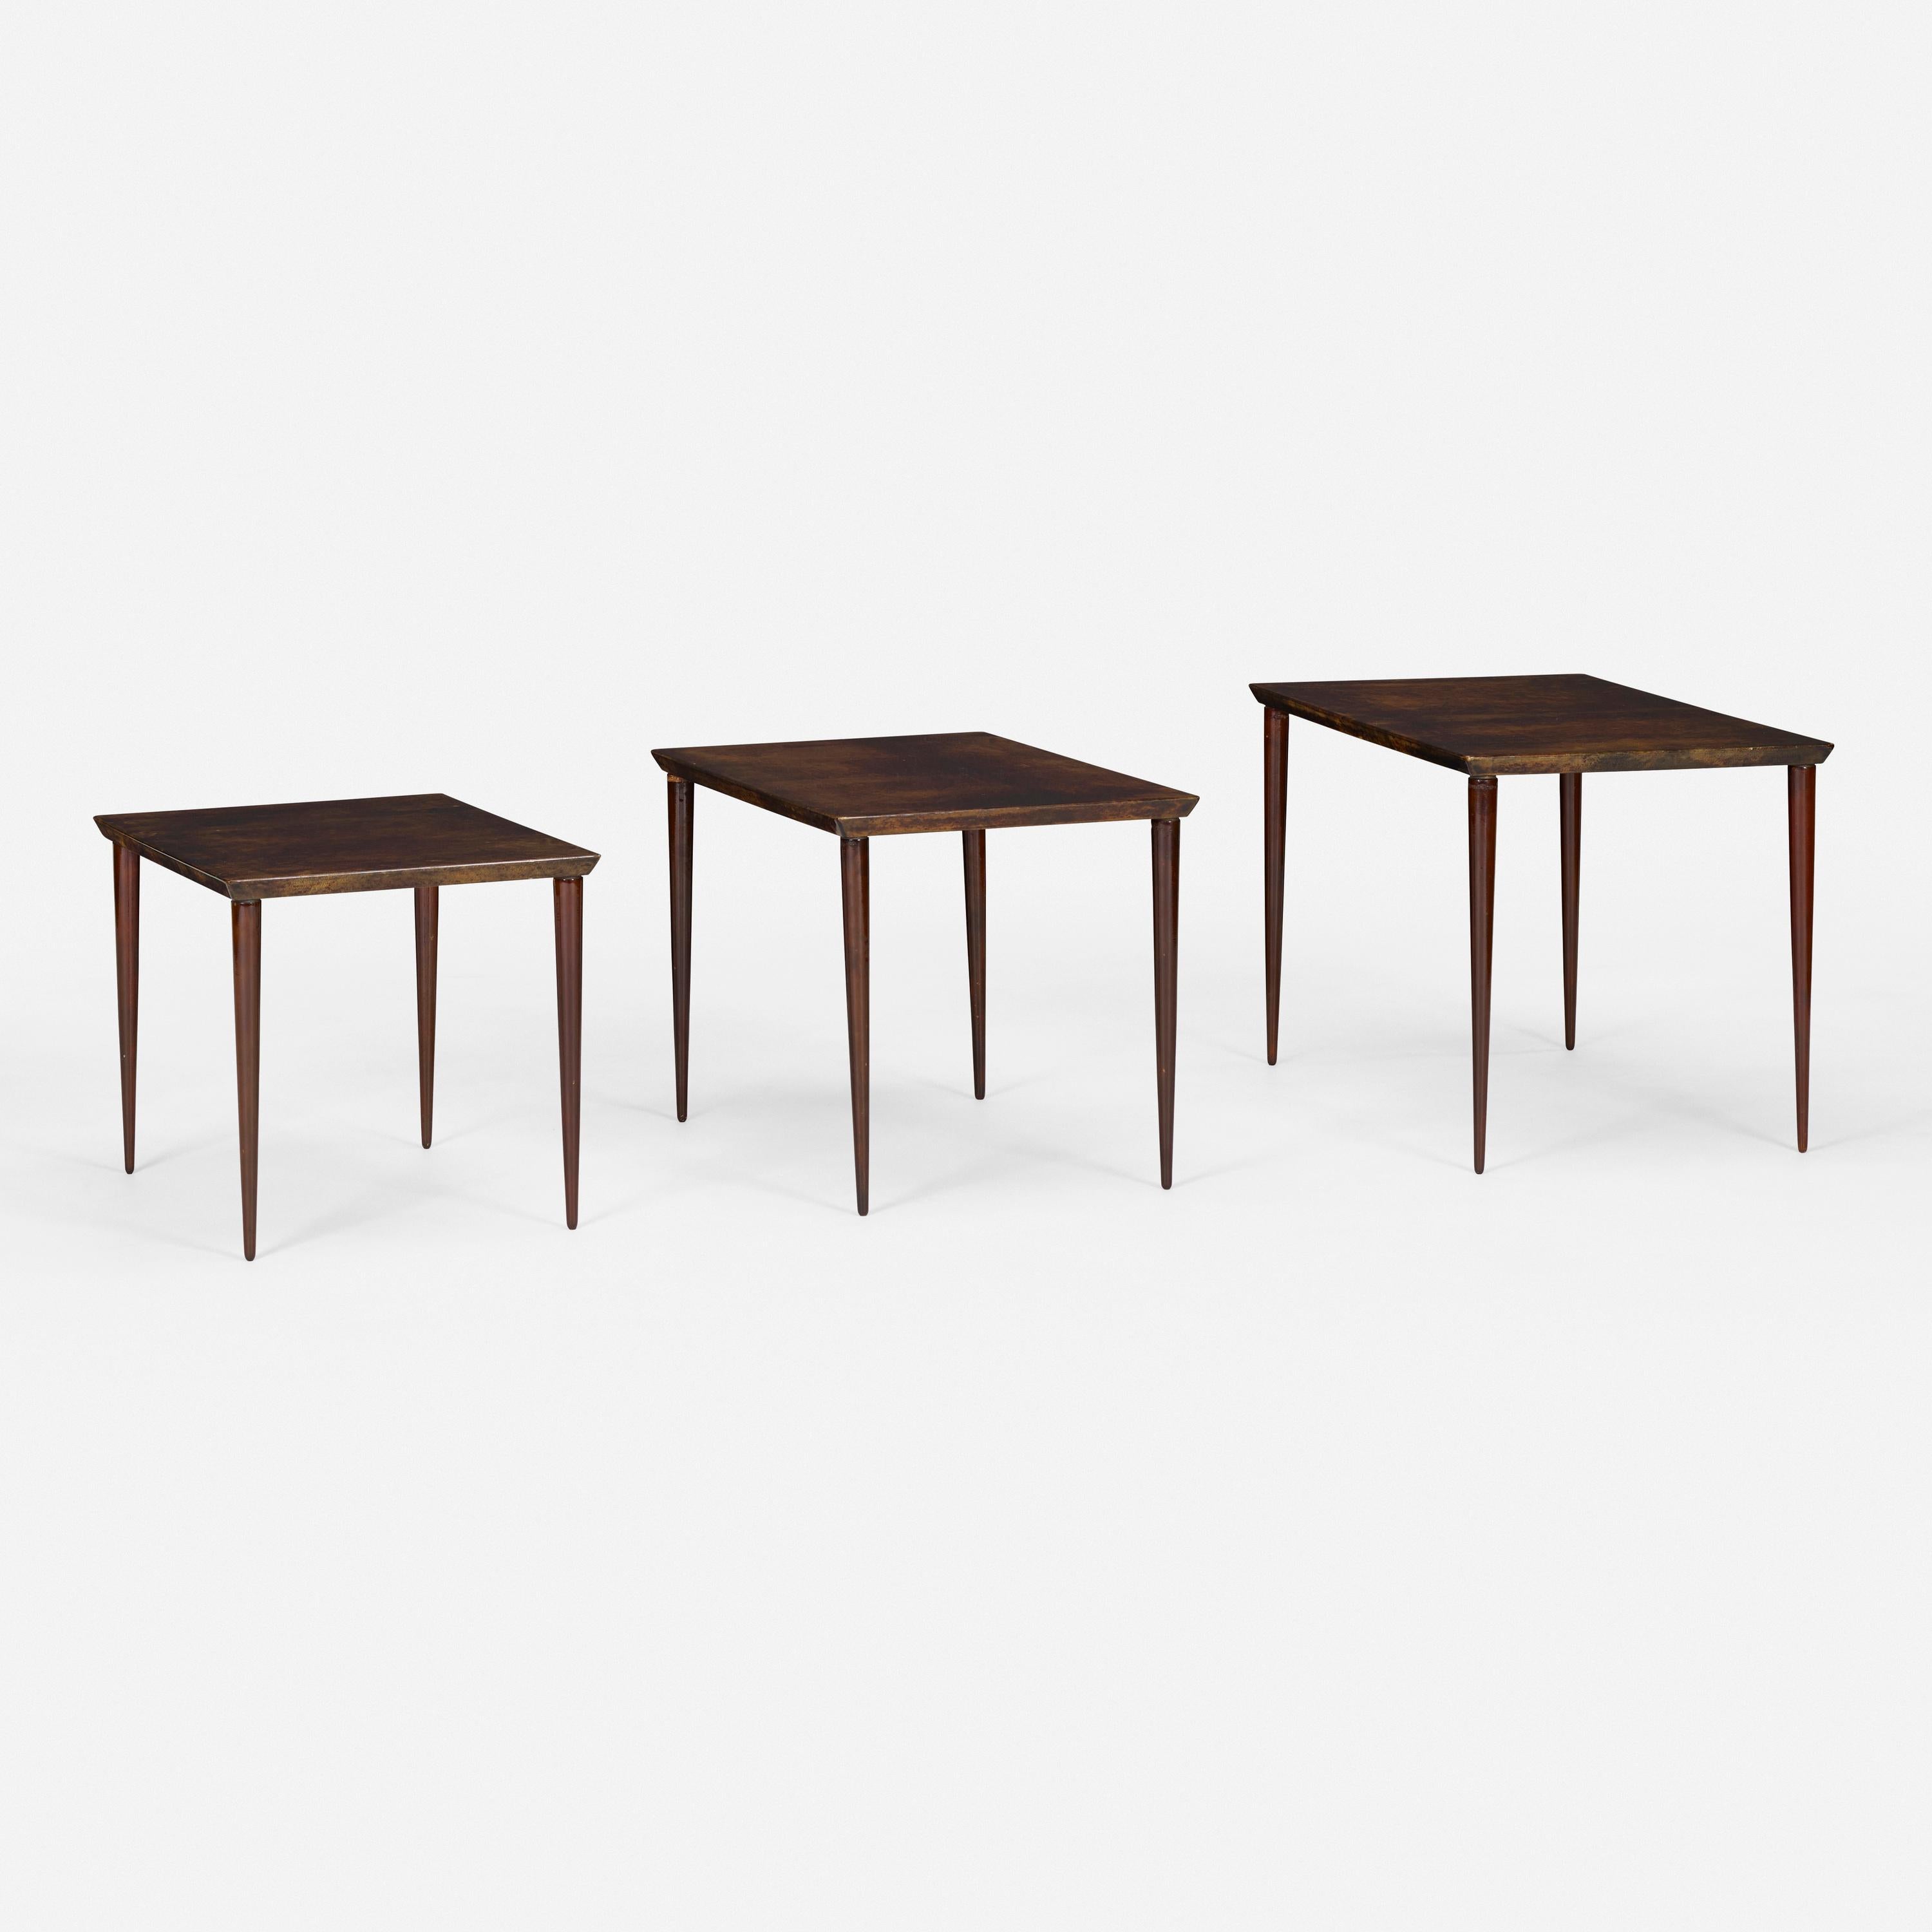 lacquered goatskin, mahogany nesting tables by Aldo Tura
smallest: 14 h × 19 w × 14½ d in 
largest: 16½ h × 26¾ w × 15½ d in
Paper studio label to underside of largest example ‘Tura Milano Italia’.